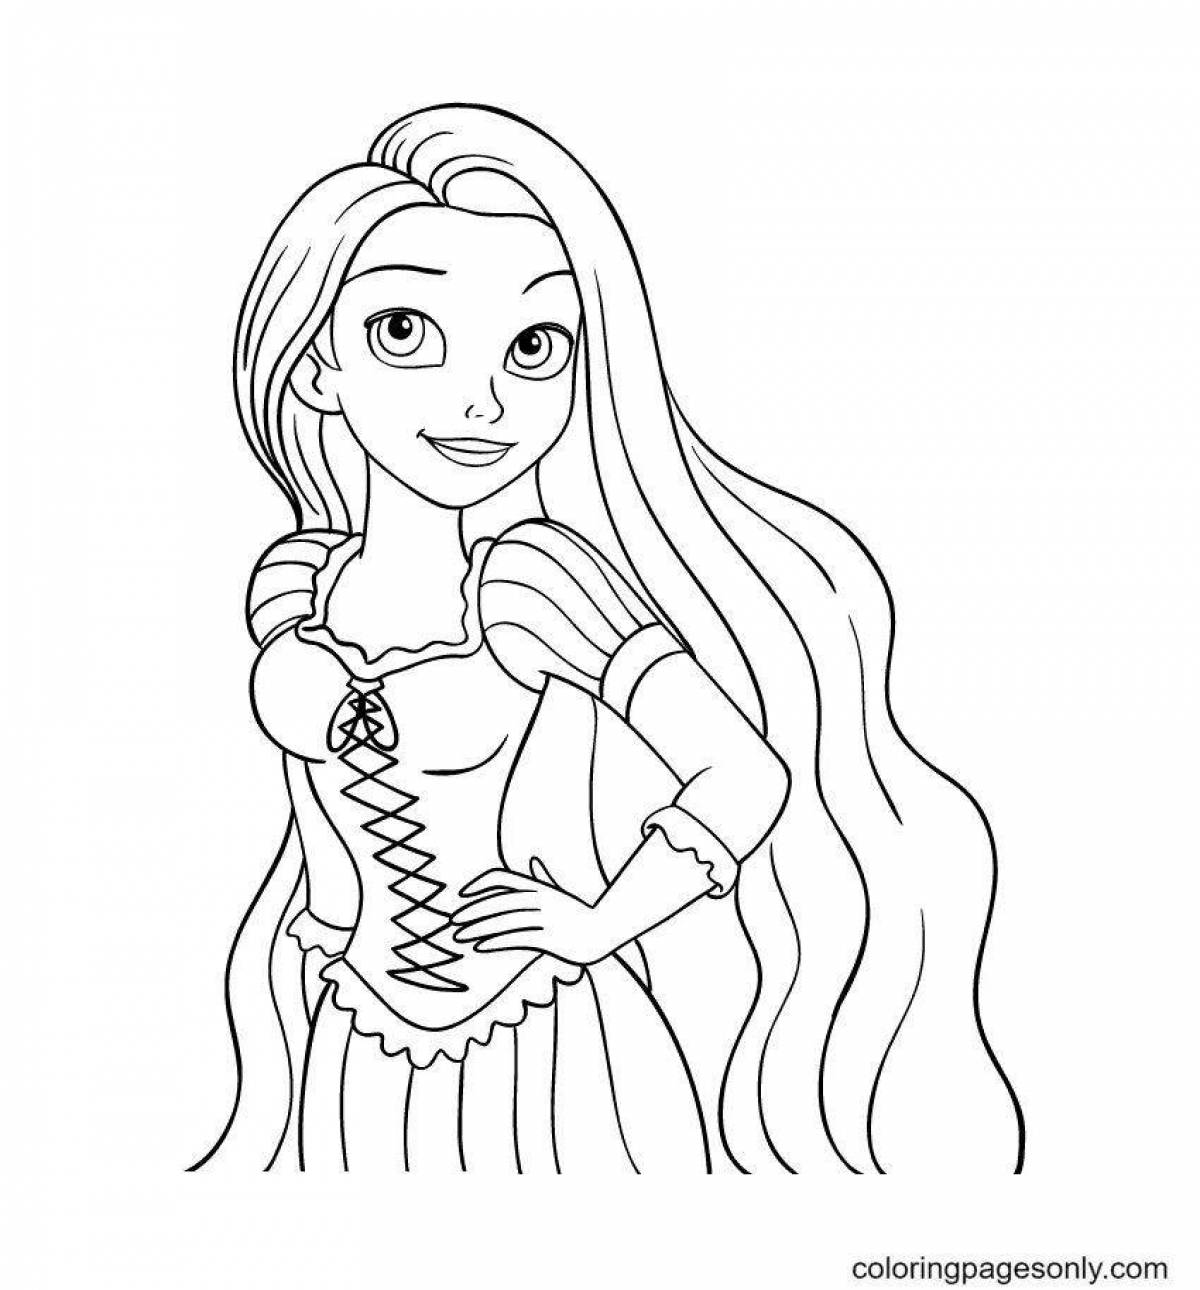 A funny rapunzel coloring book for kids